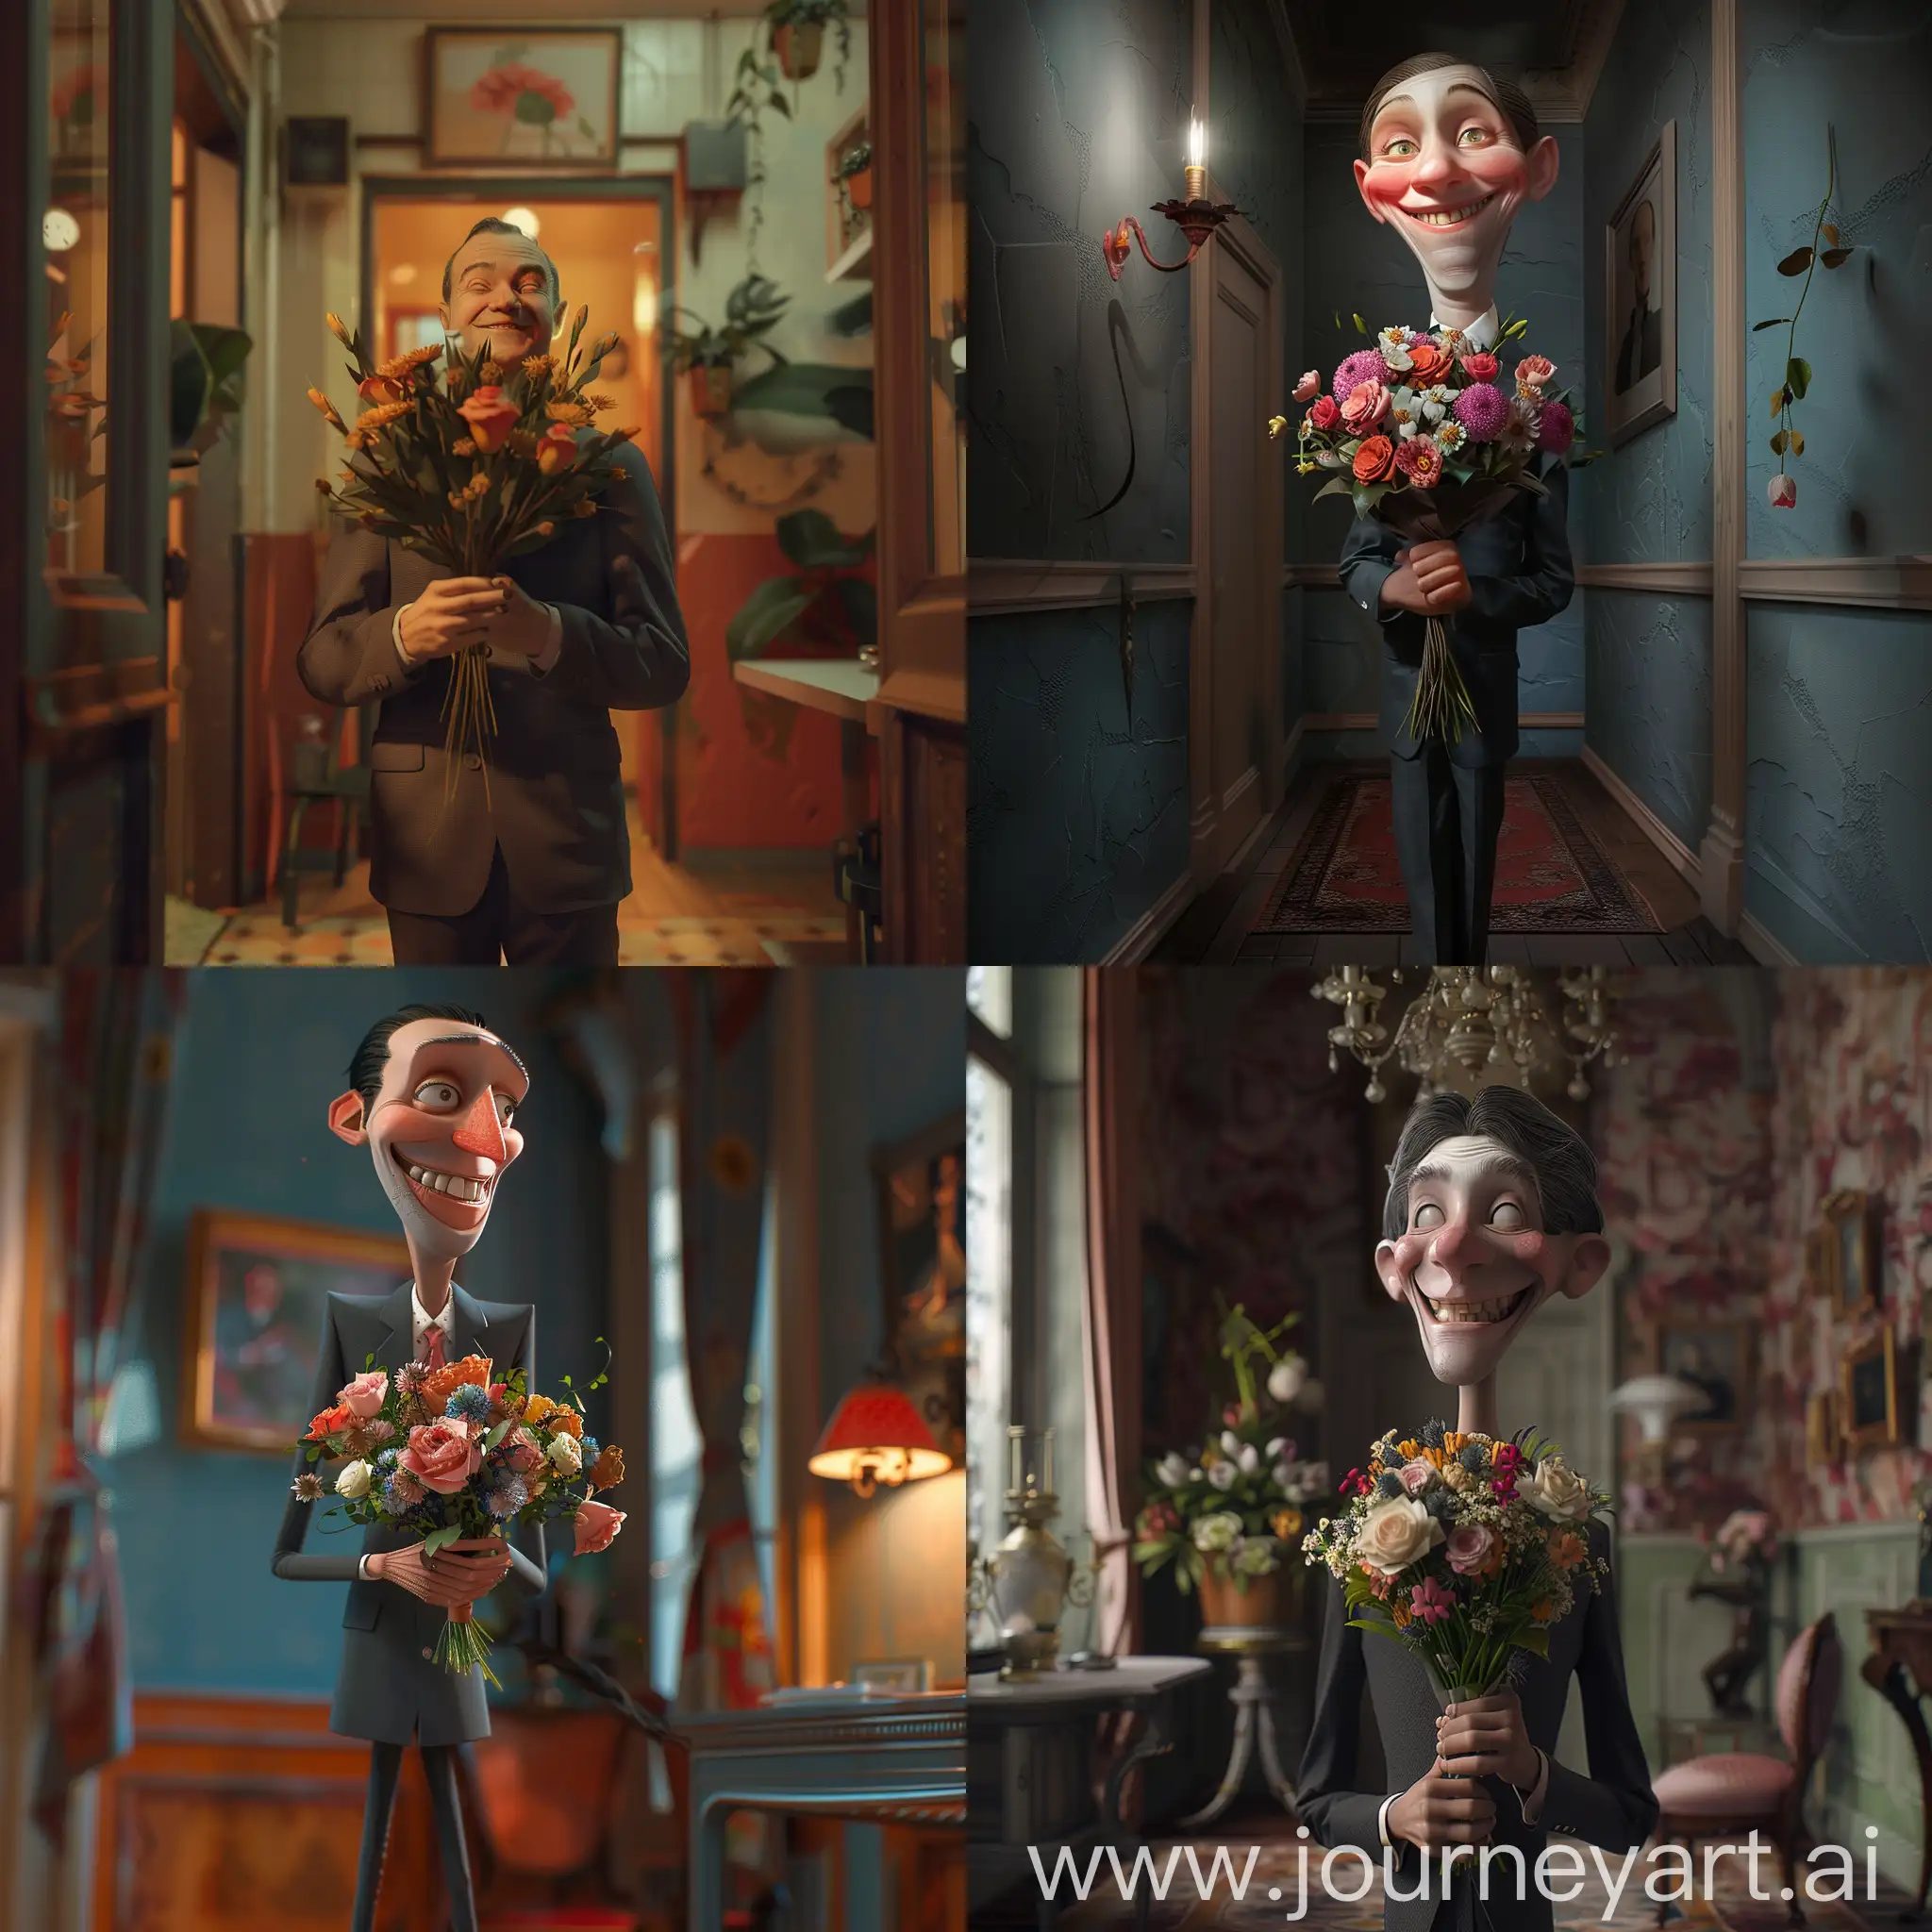 in the center of the image is a thin guy, you can see him from head to hips. The guy is dressed in a strict suit, he carefully holds a bouquet of flowers in his hands and smiles while looking at the viewer.  Photorealistic image of high quality